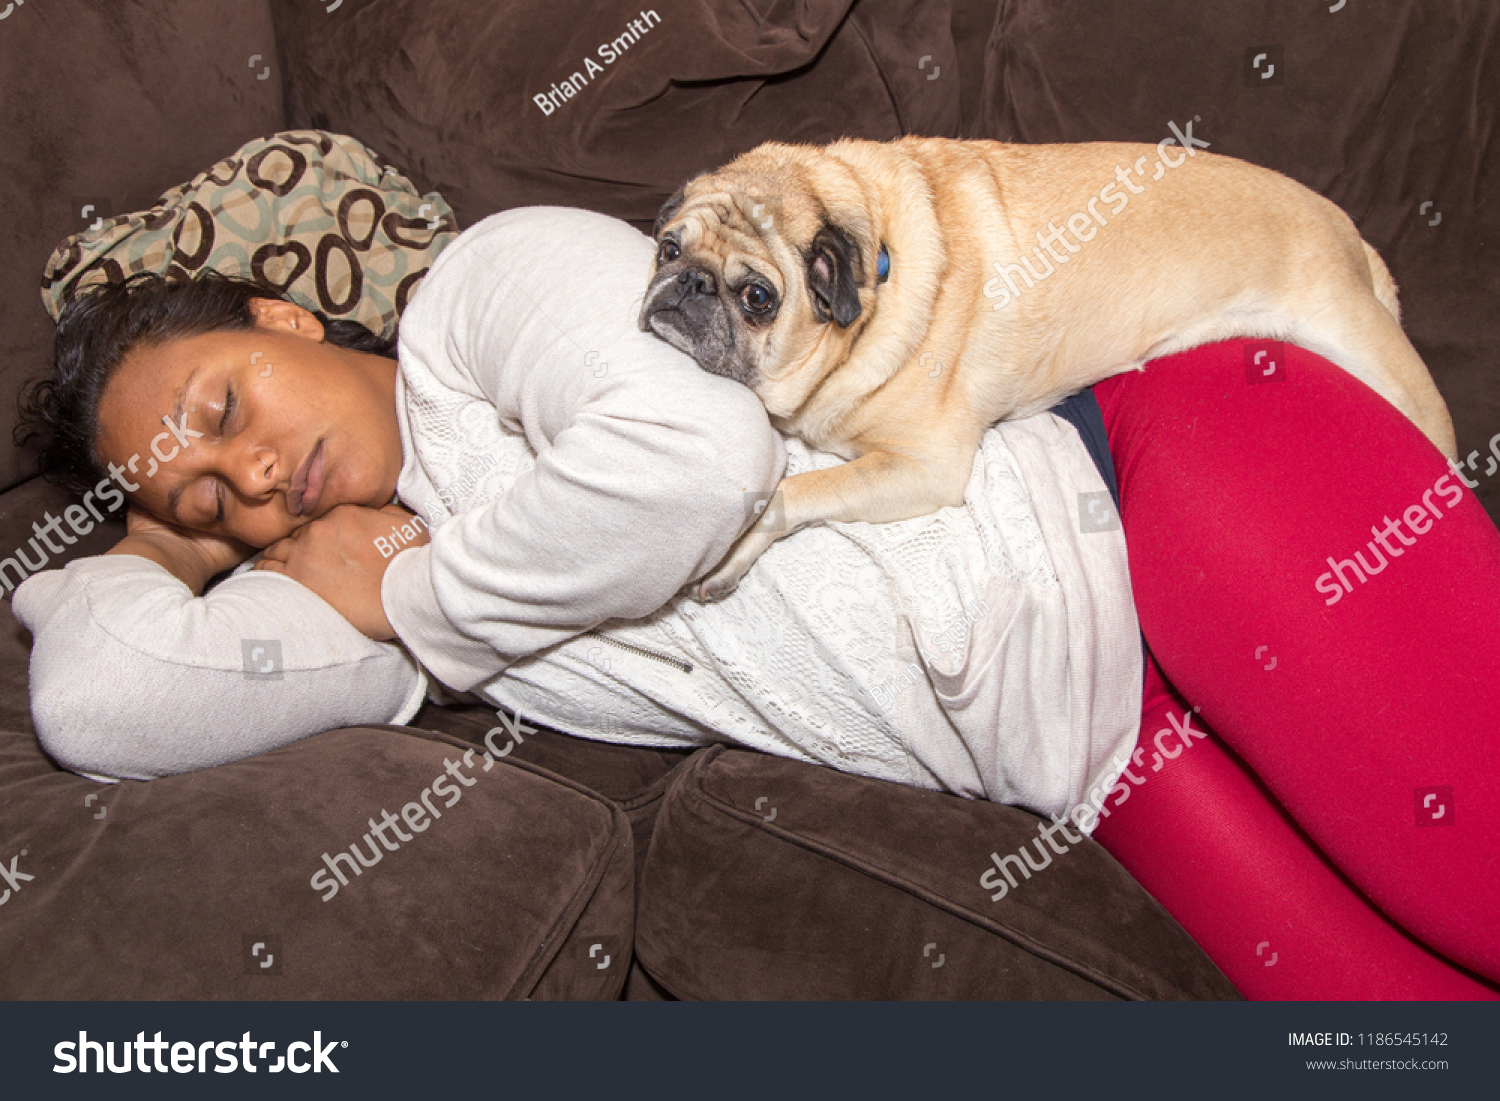 dog on top of woman